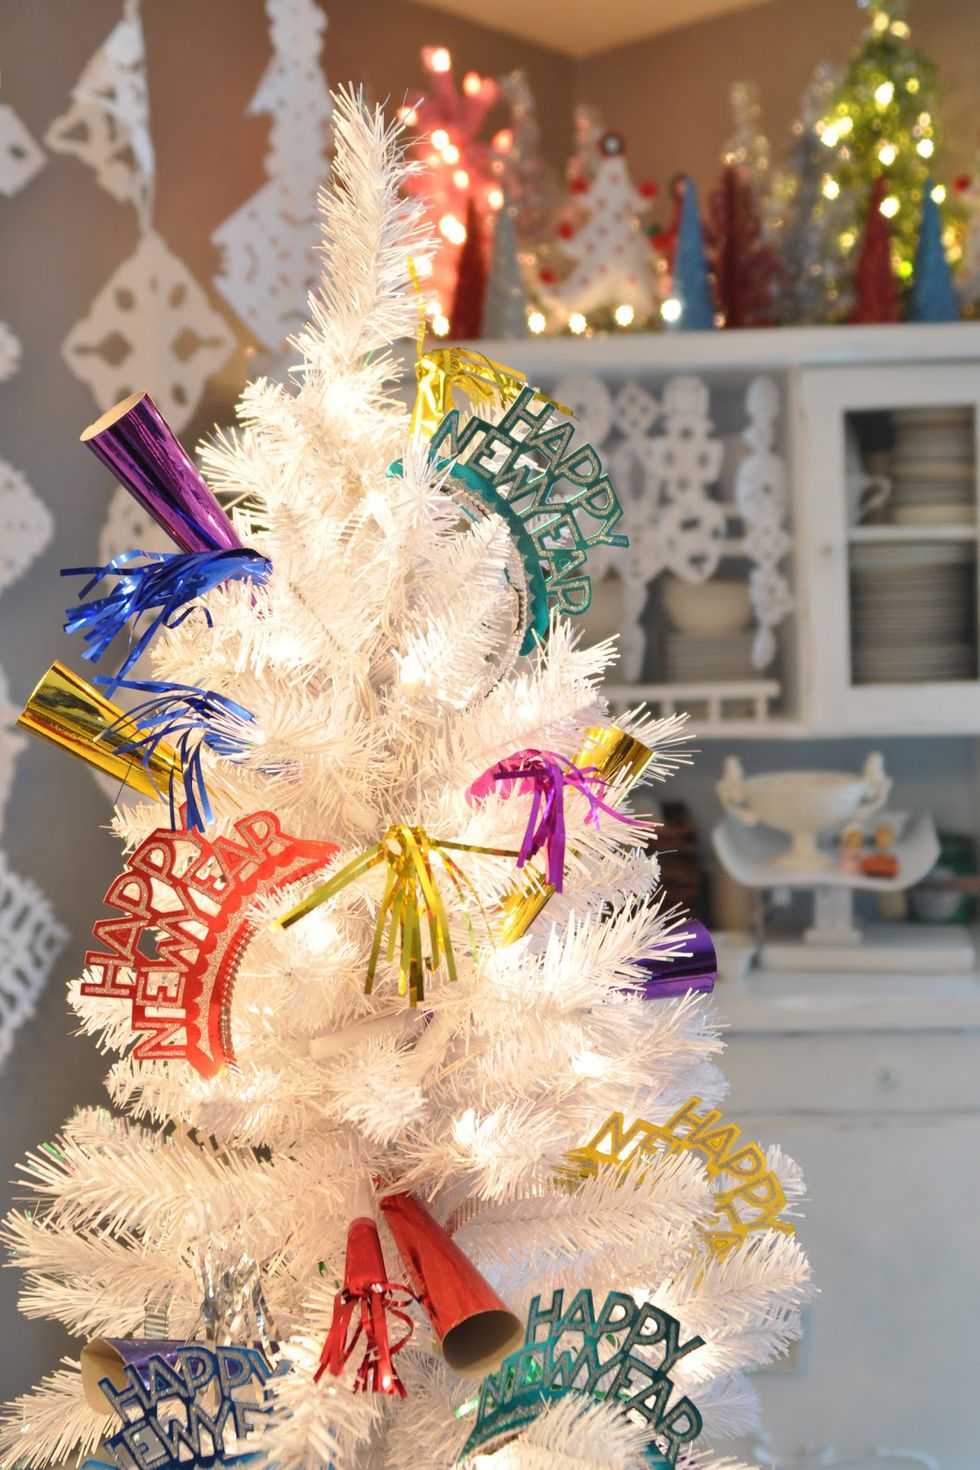 <p>Strip your tree down to the needles and lights, and then adorn it with party poppers and streamers.&nbsp;It doesn't get easier than that!</p><p><em data-redactor-tag="em"><a href="http://www.domesticfashionista.com/2011/12/new-years-eve-tree.html" target="_blank" data-tracking-id="recirc-text-link" data-href="http://www.domesticfashionista.com/2011/12/new-years-eve-tree.html">Get the tutorial from Domestic Fashionista »</a></em></p>